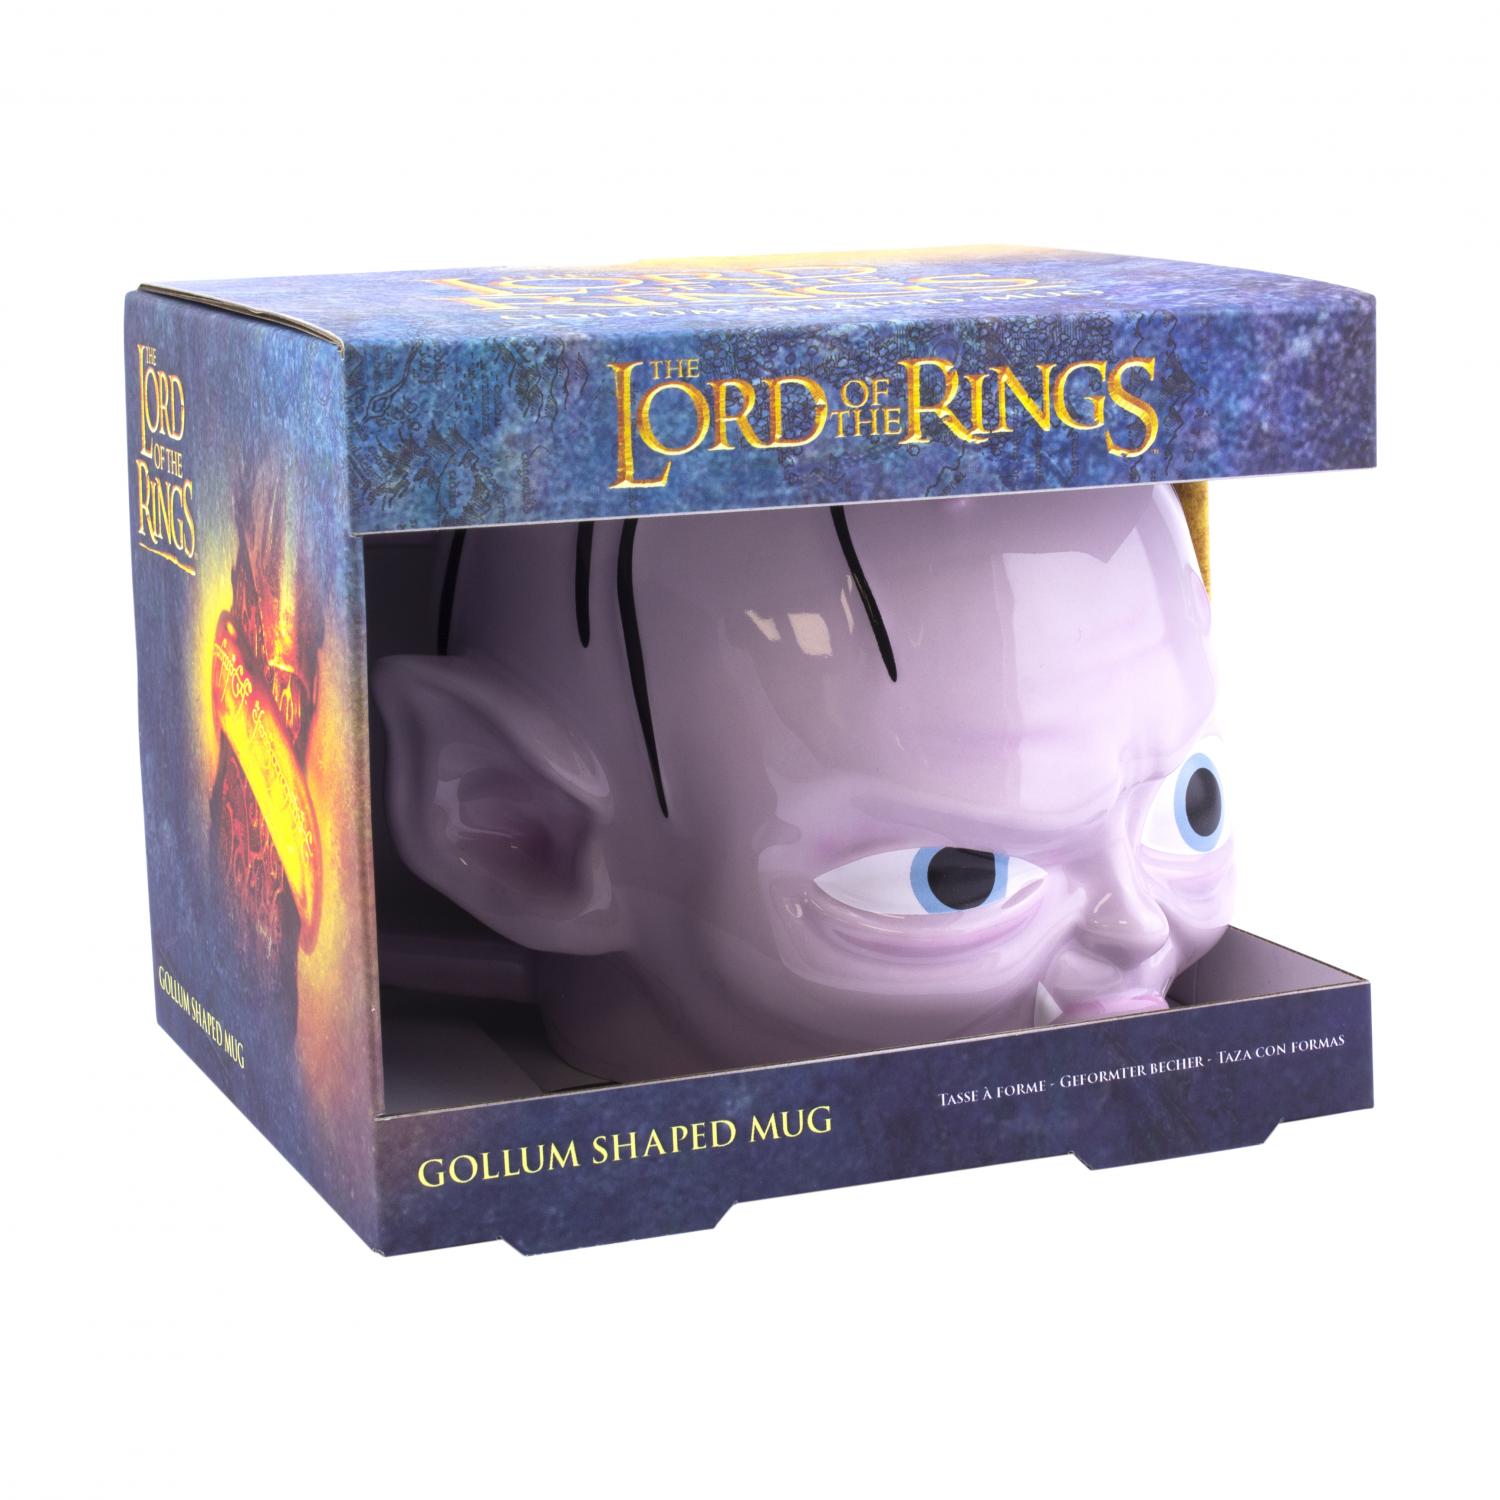 The Lord of the Rings - Gollum Shaped Mug